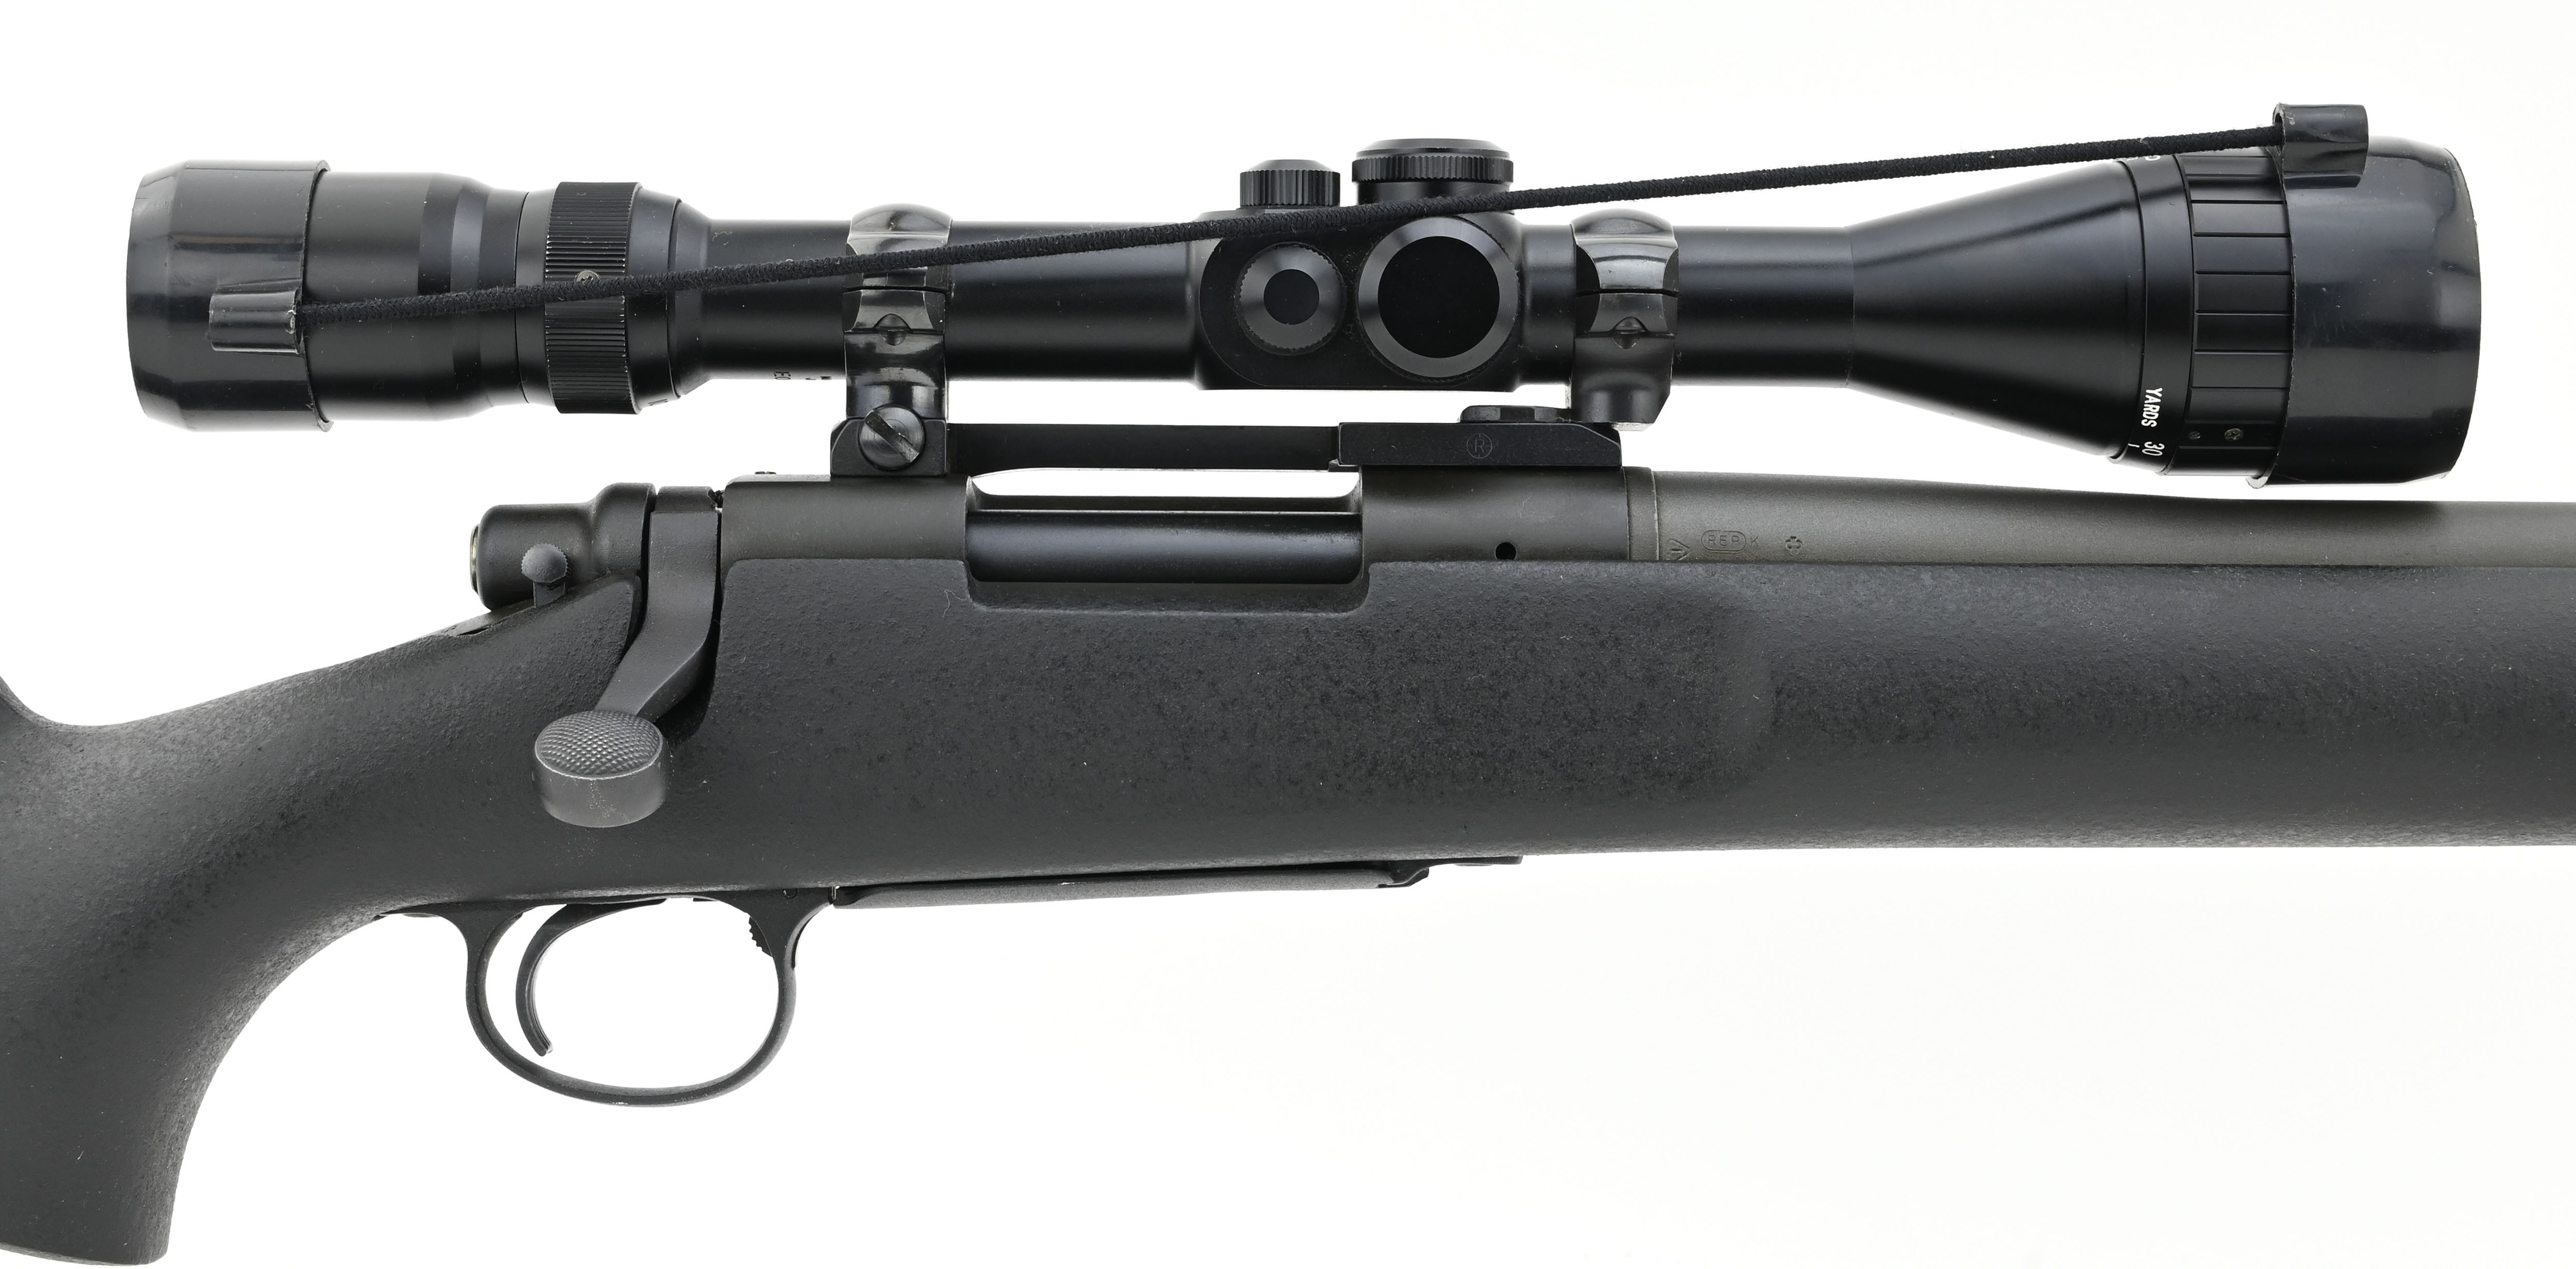 Remington 700 Price - How do you Price a Switches?